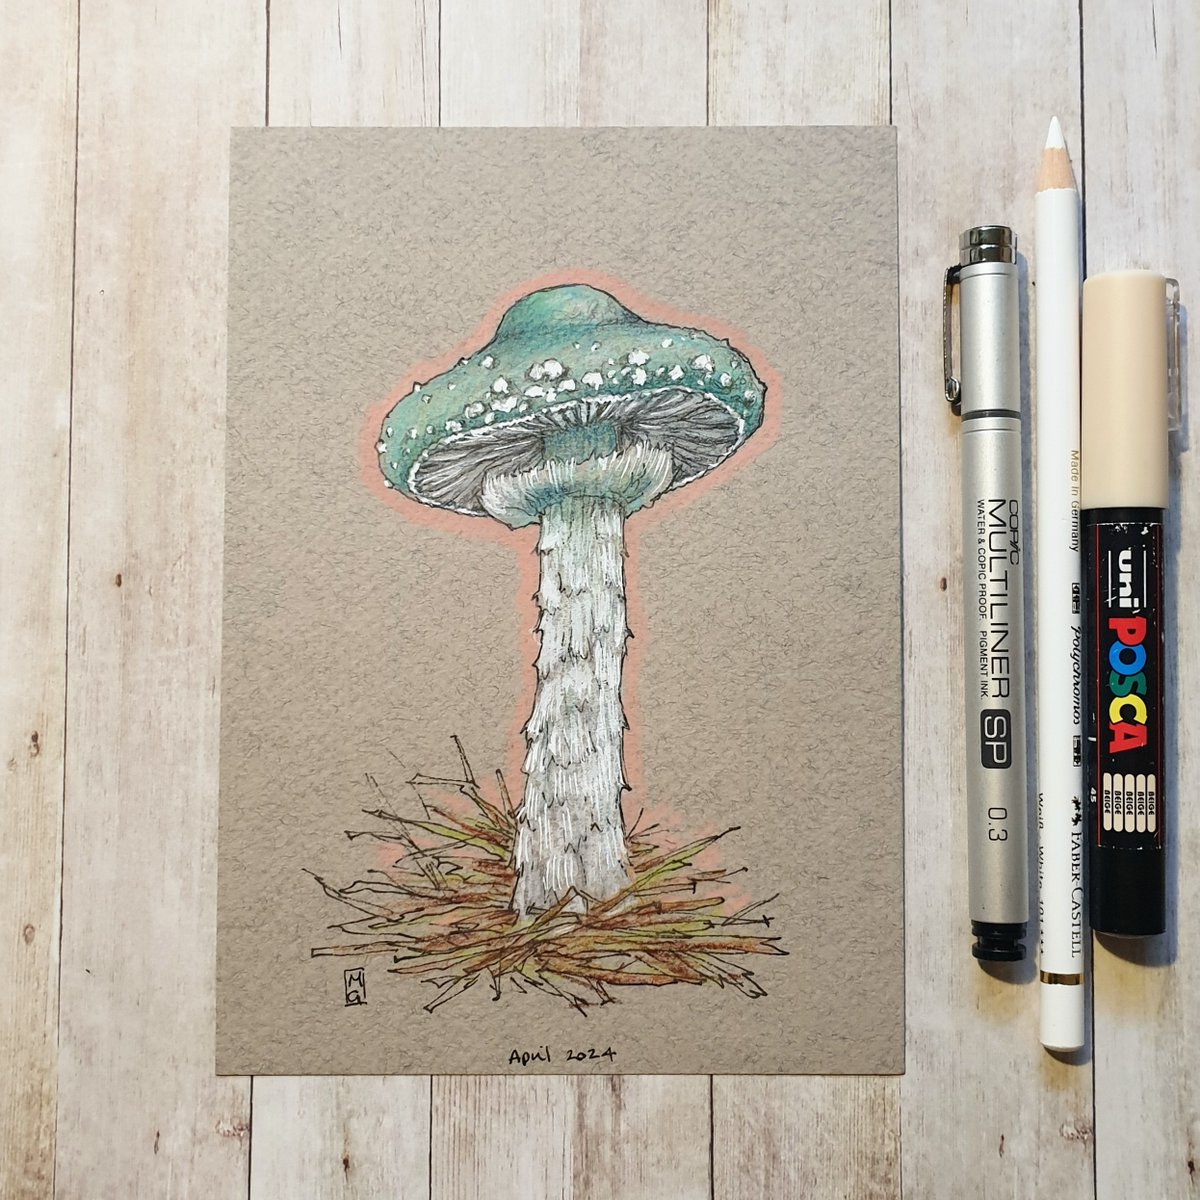 Verdigris Agaric is widespread but not particularly common in Britain. Found on lawns and in woodland areas, but particularly favours wood-chip mulches in gardens, and parks from July to October. theweeowlart.etsy.com/listing/170724… #OriginalArt #drawing #Mushrooms #MushroomDrawing